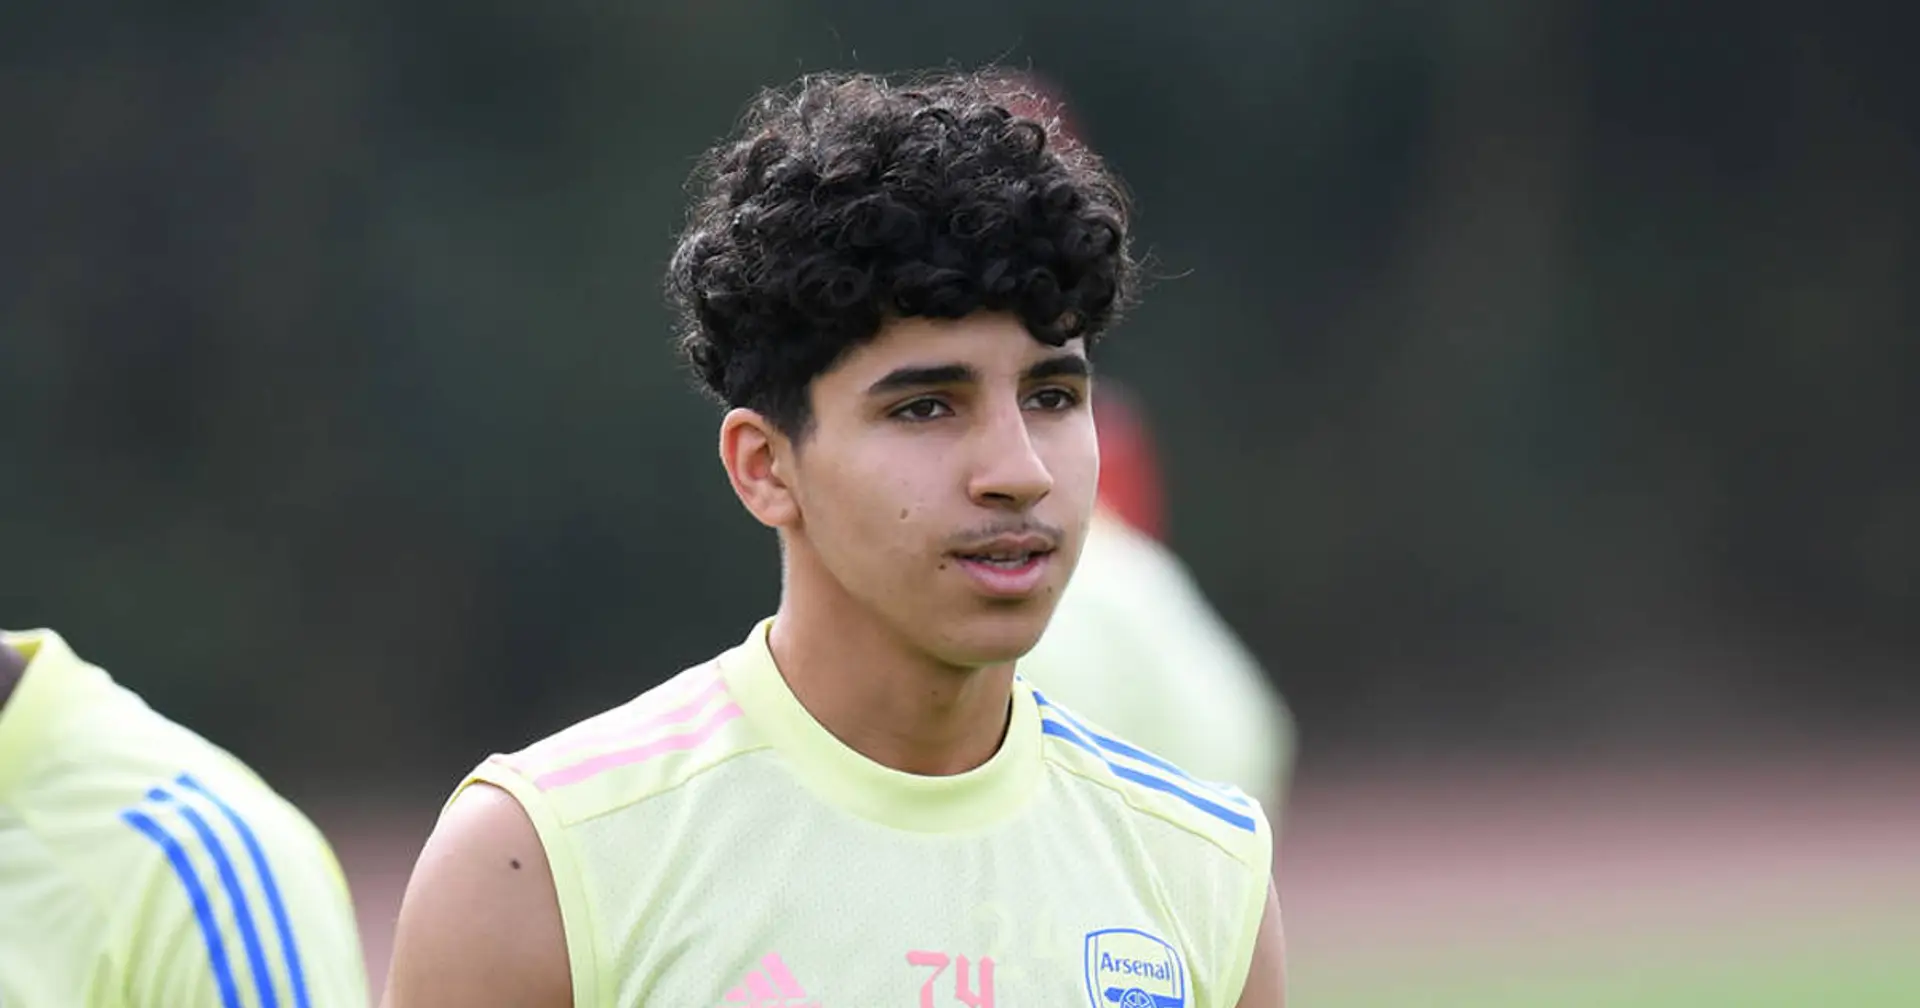 OFFICIAL: Arsenal sign highly-talented youngster Salah-Eddine, kid outlines plans for his first season